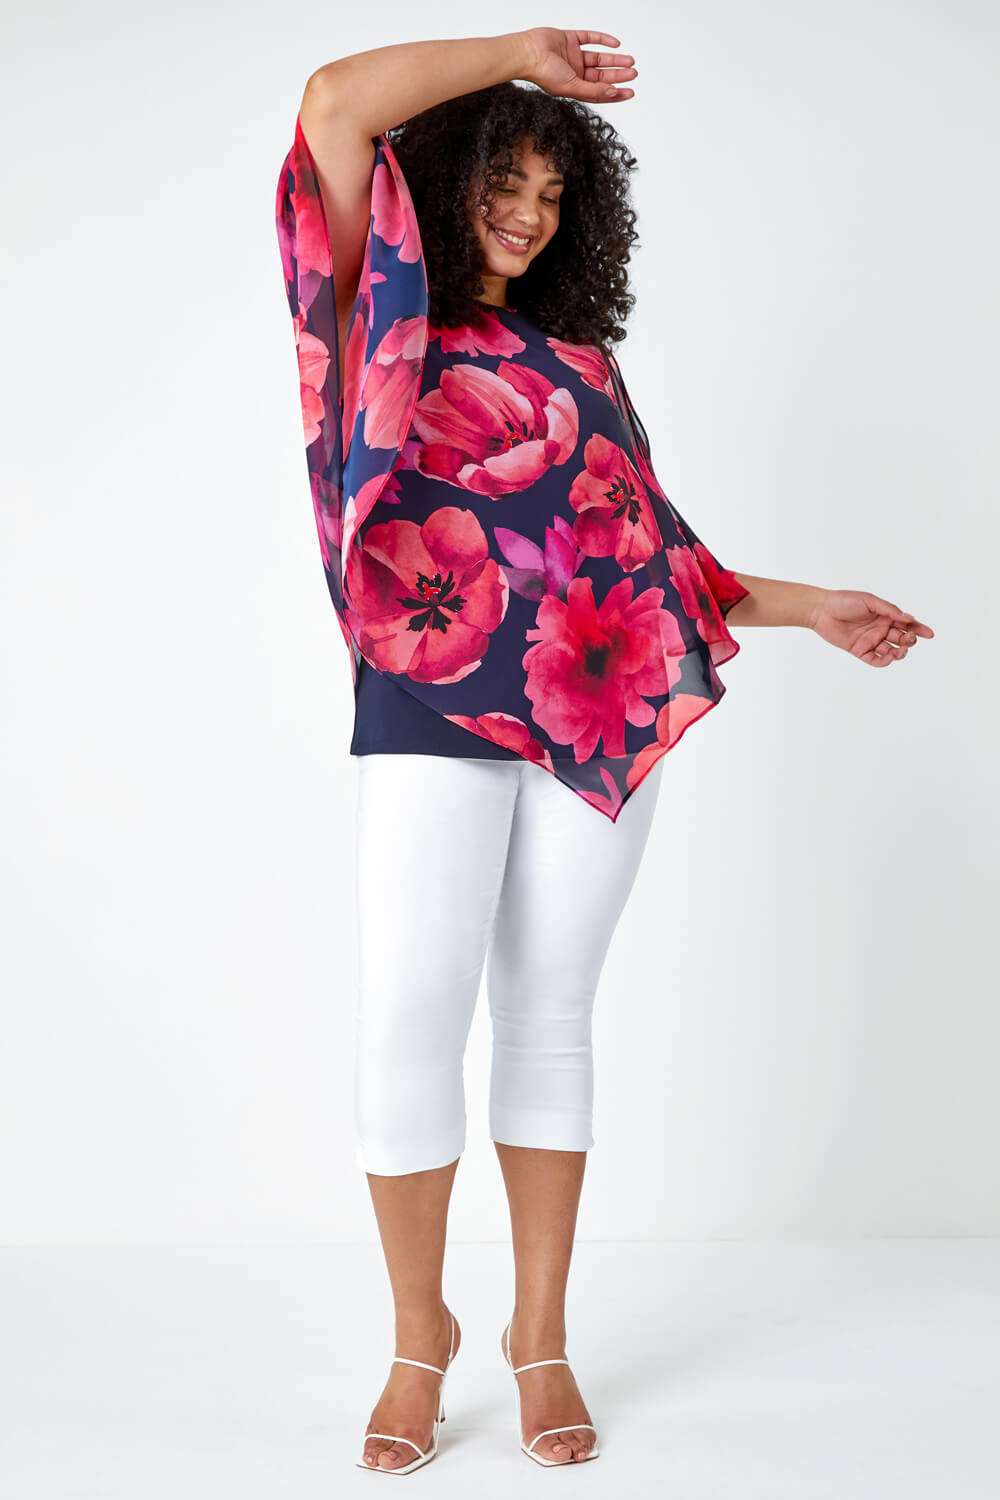 PINK Curve Floral Print Chiffon Overlay Top, Image 1 of 5